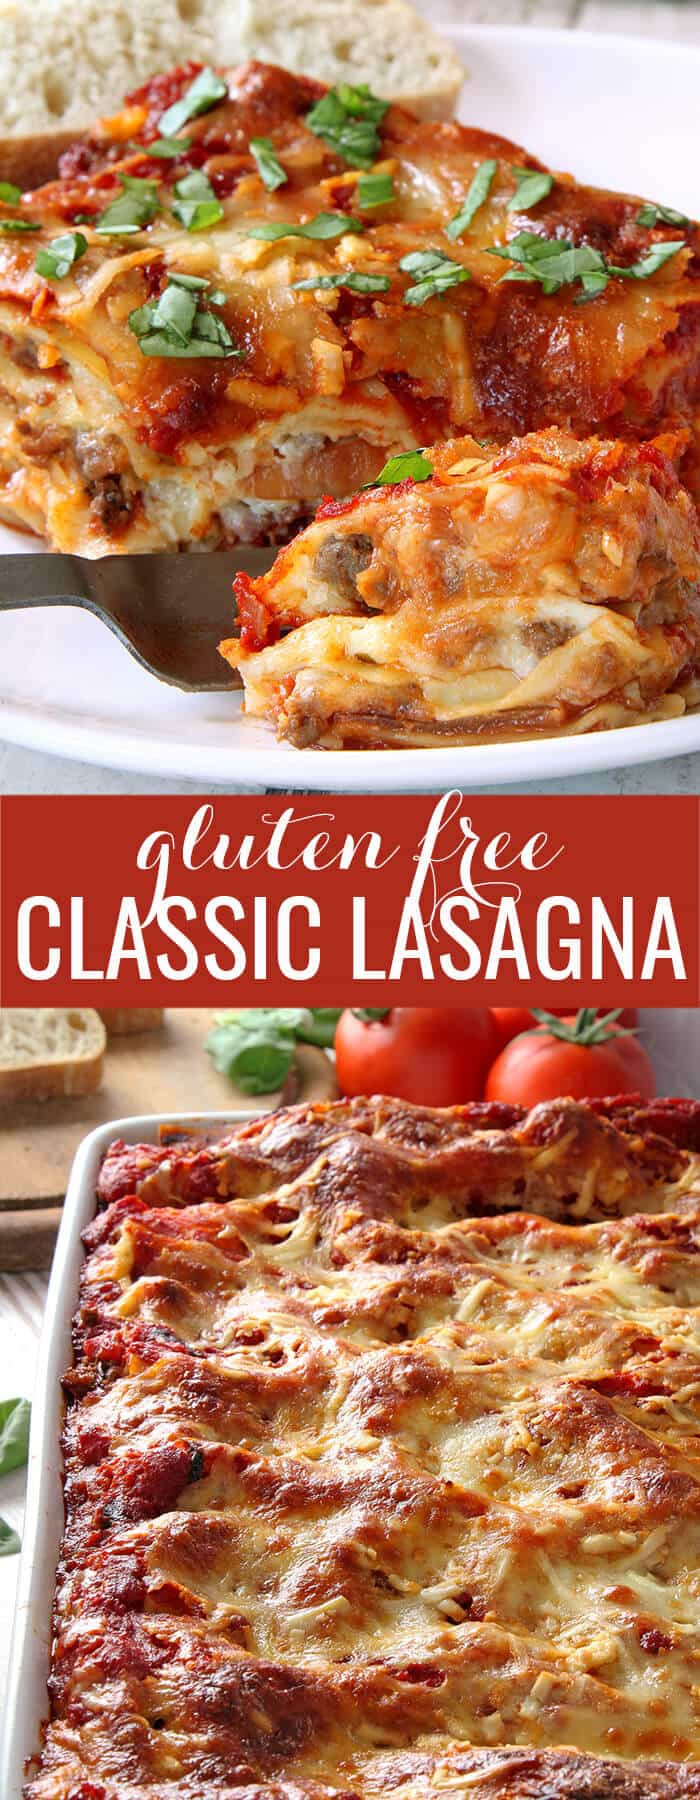 Gluten Free Foods Recipes
 Gluten Free Lasagna ⋆ Great gluten free recipes for every